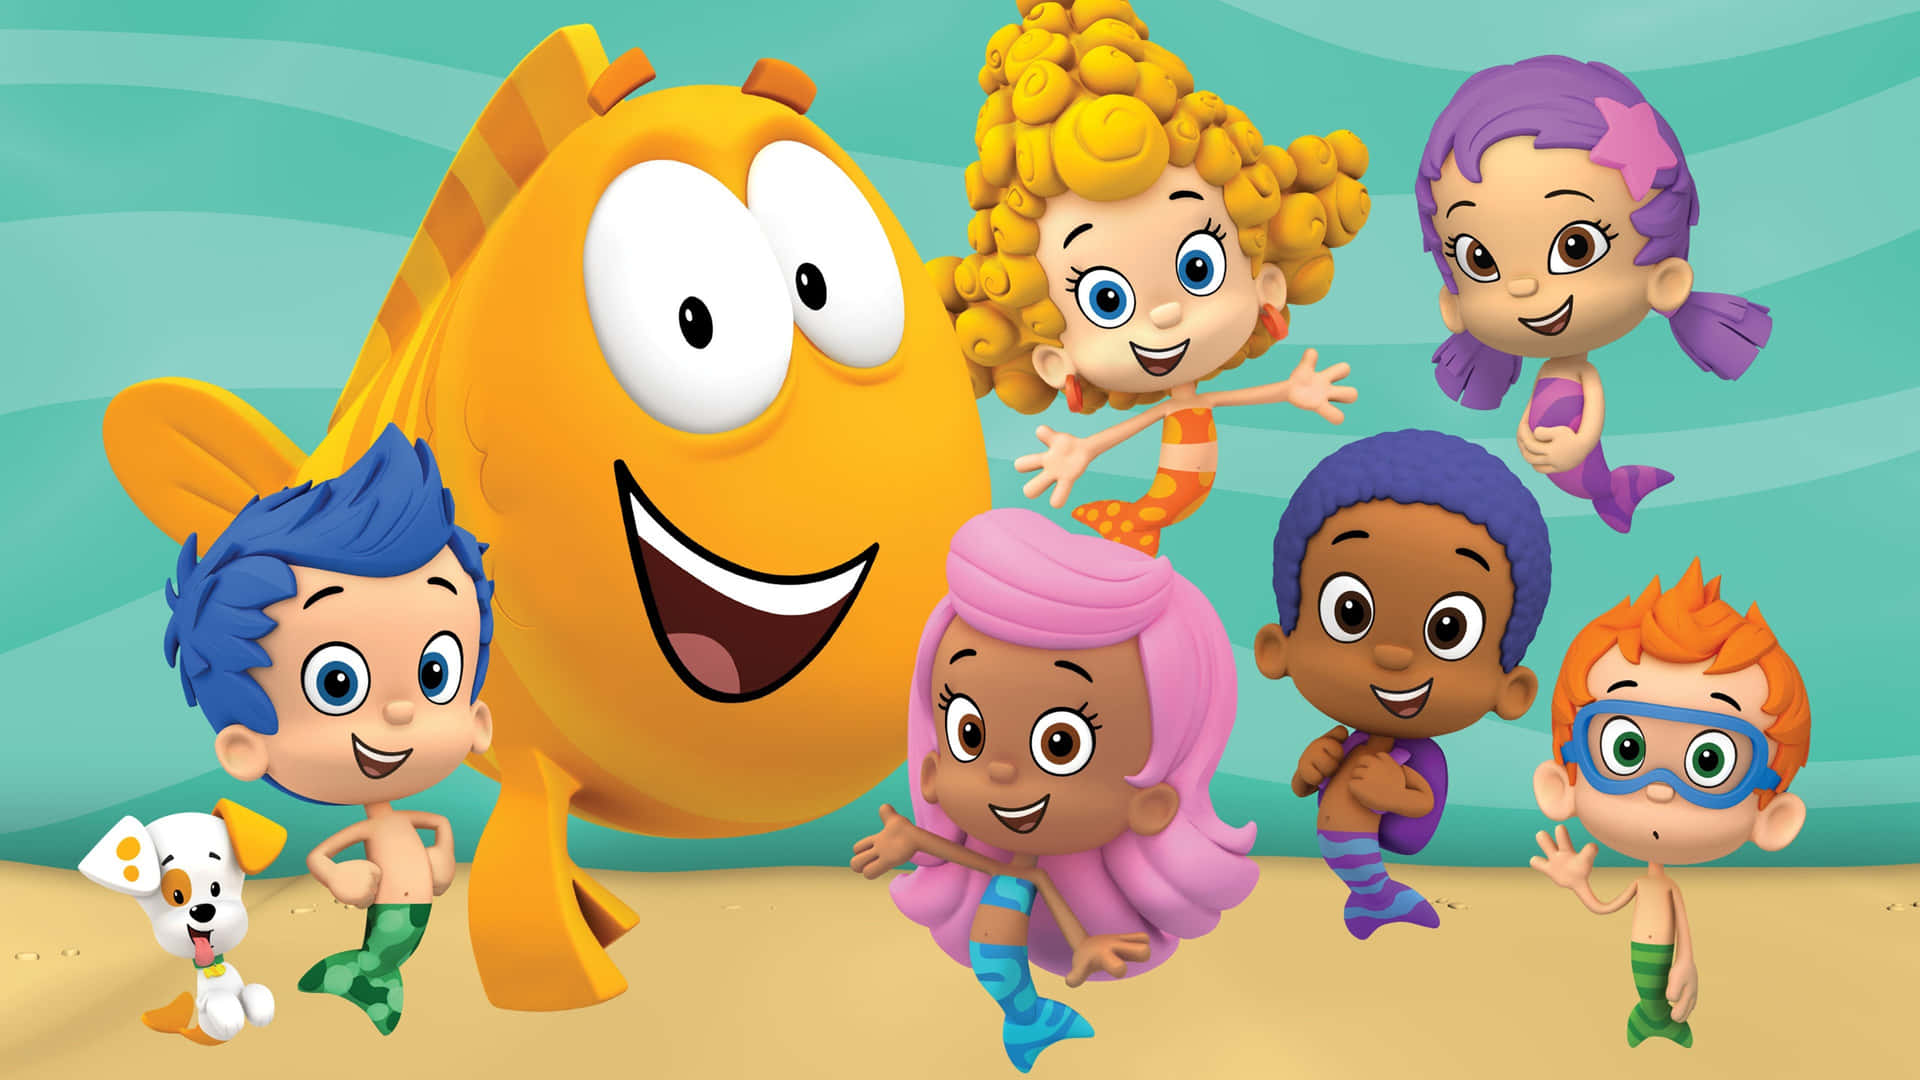 Come and dive into an underwater world of fun with Bubble Guppies!